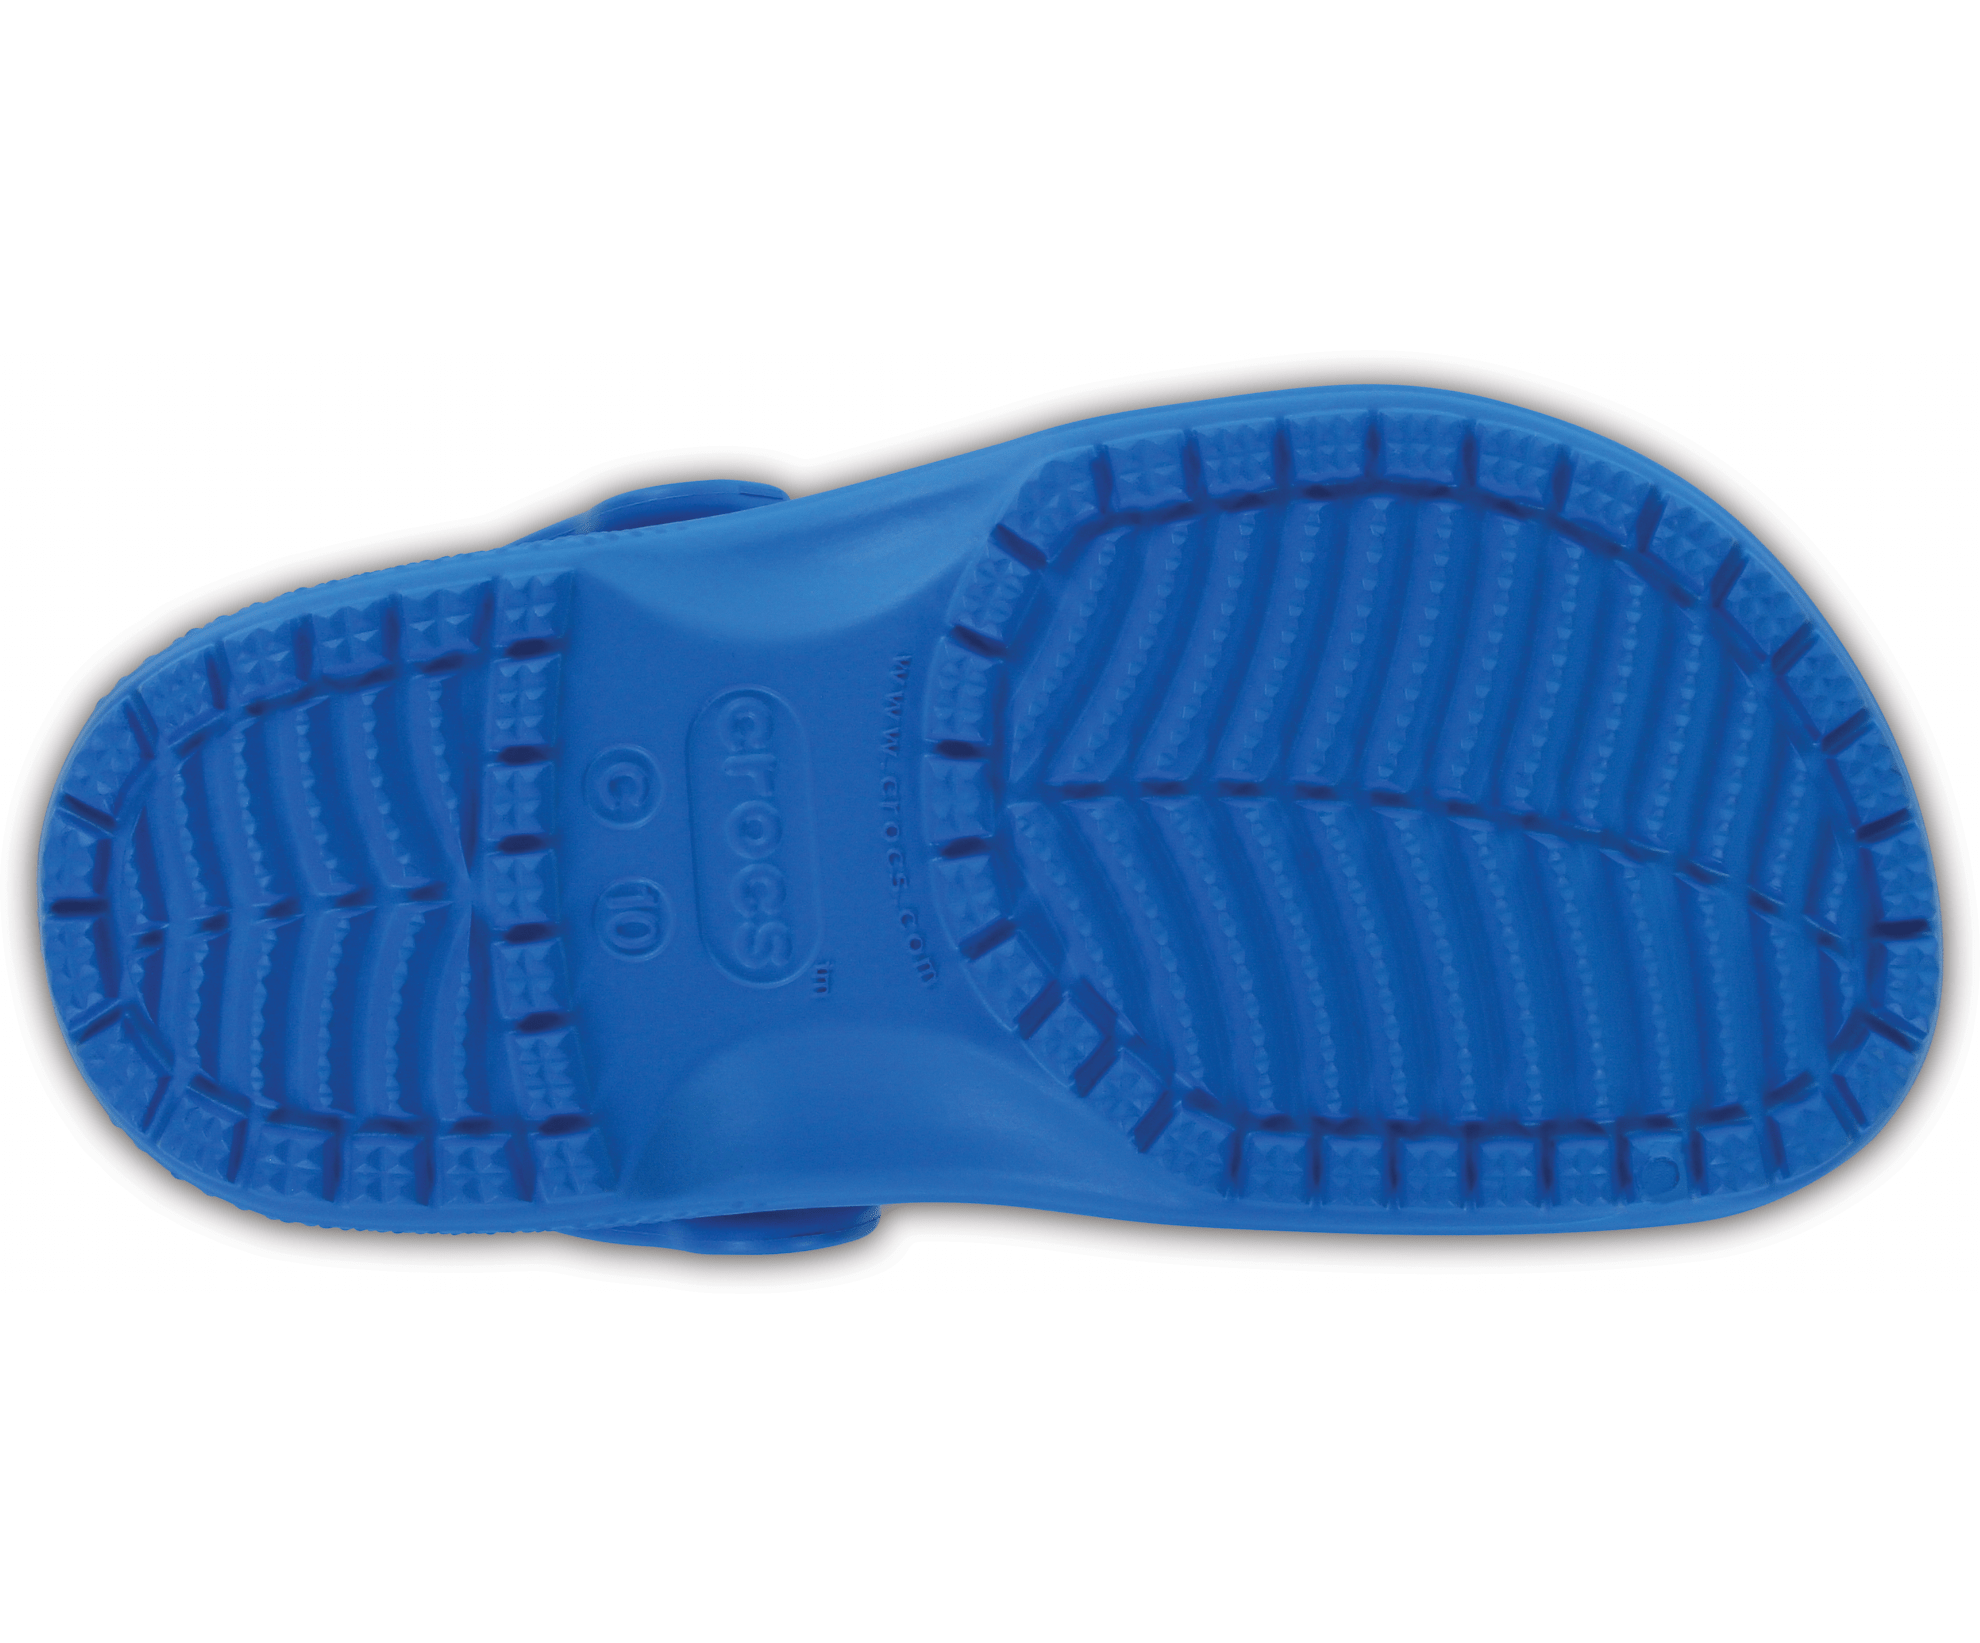 Classic Crocs Clog for Kids/Toddlers - Classic Blue - Laura-Jo Shoes